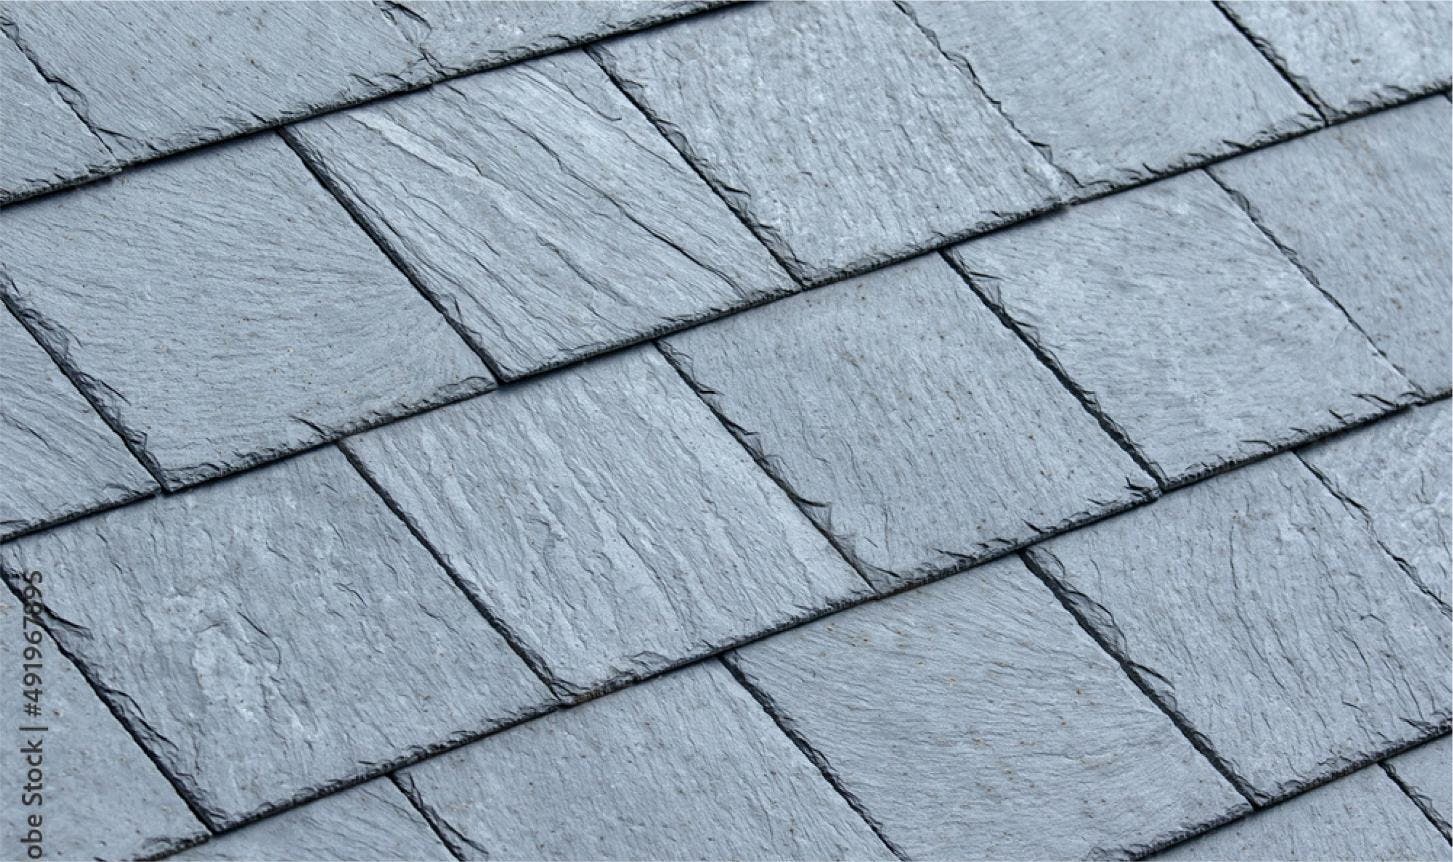 Specialty Roofing | Slate Shingle Roofing | Specialty Residential | Specialty Commercial